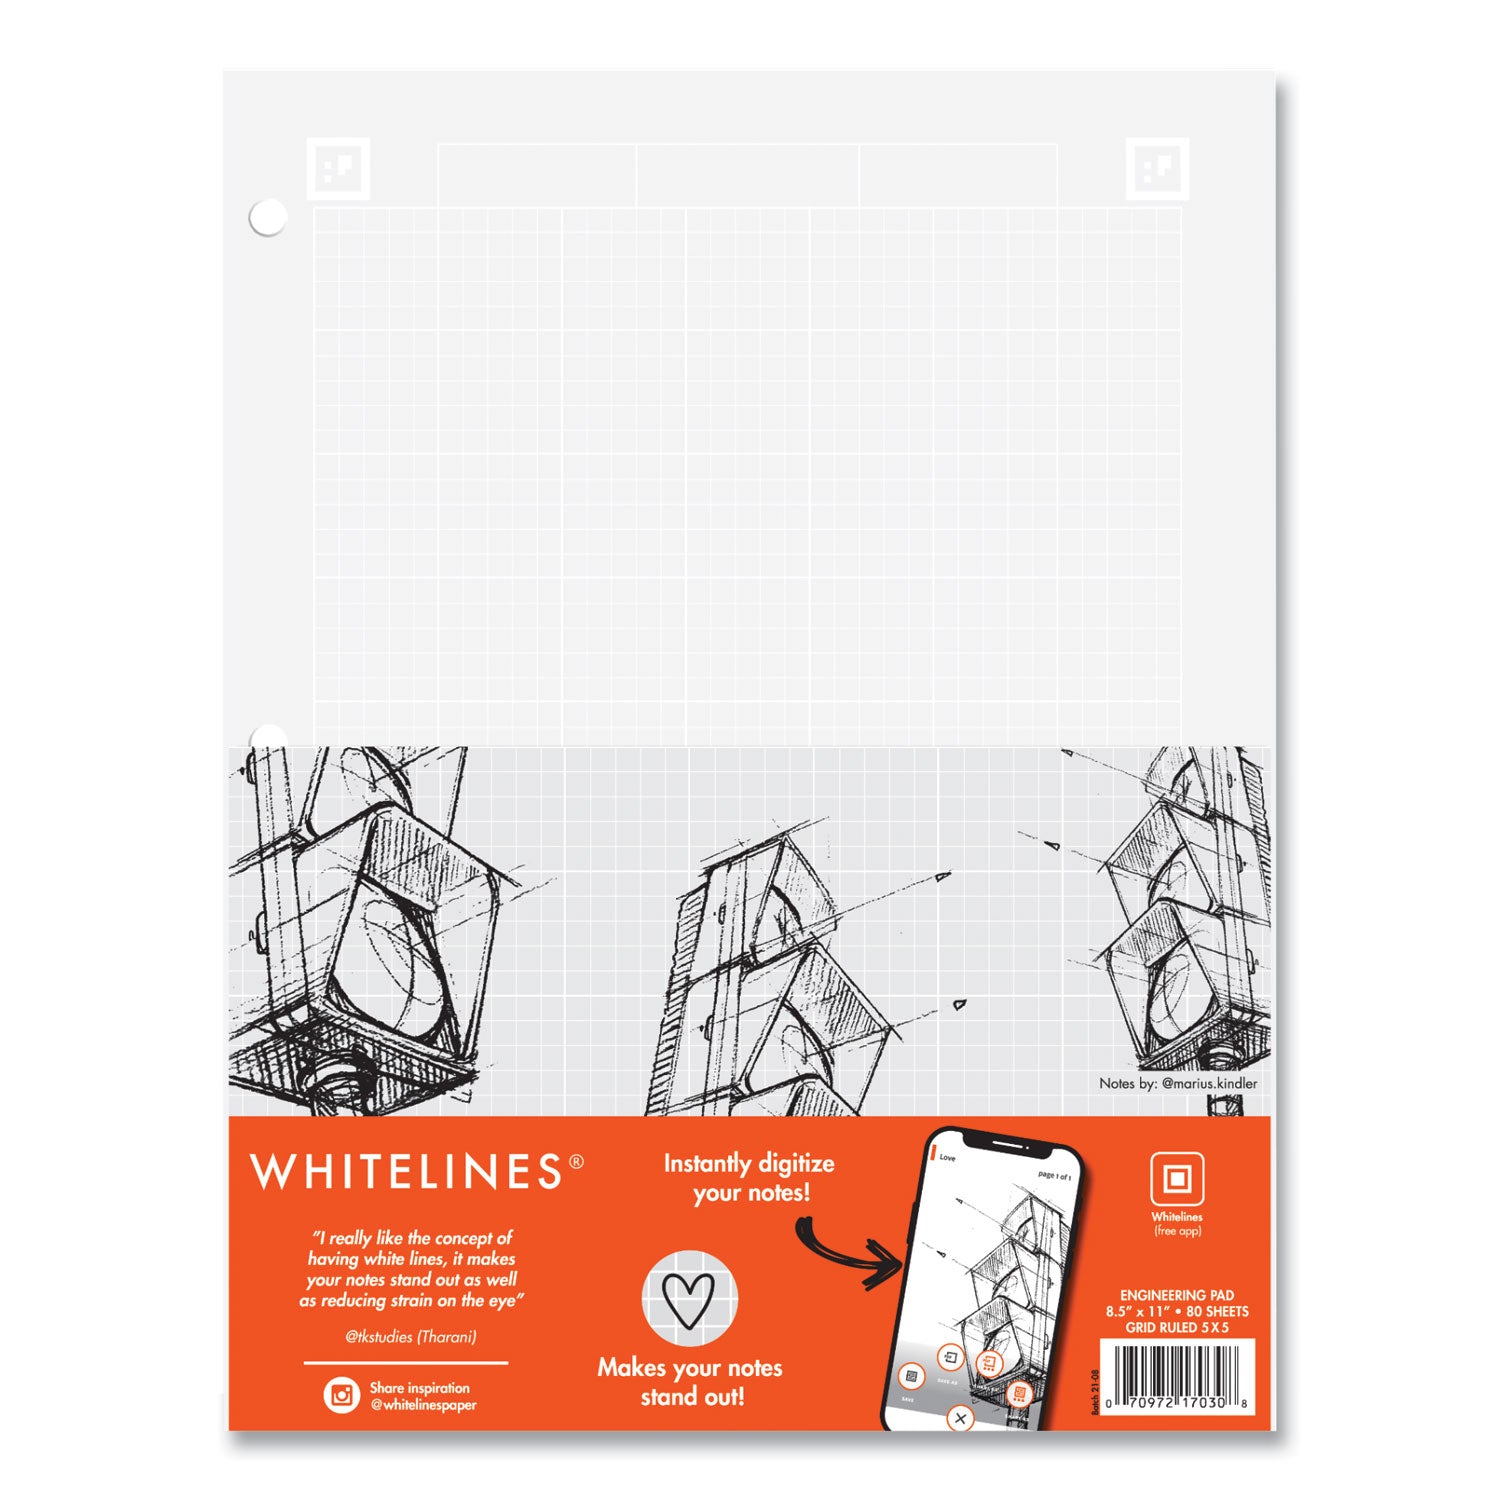 whitelines-engineering-pad-5-sq-in-quadrille-rule-80-gray-85-x-11-sheets-24-carton-ships-in-4-6-business-days_roa17030cs - 2